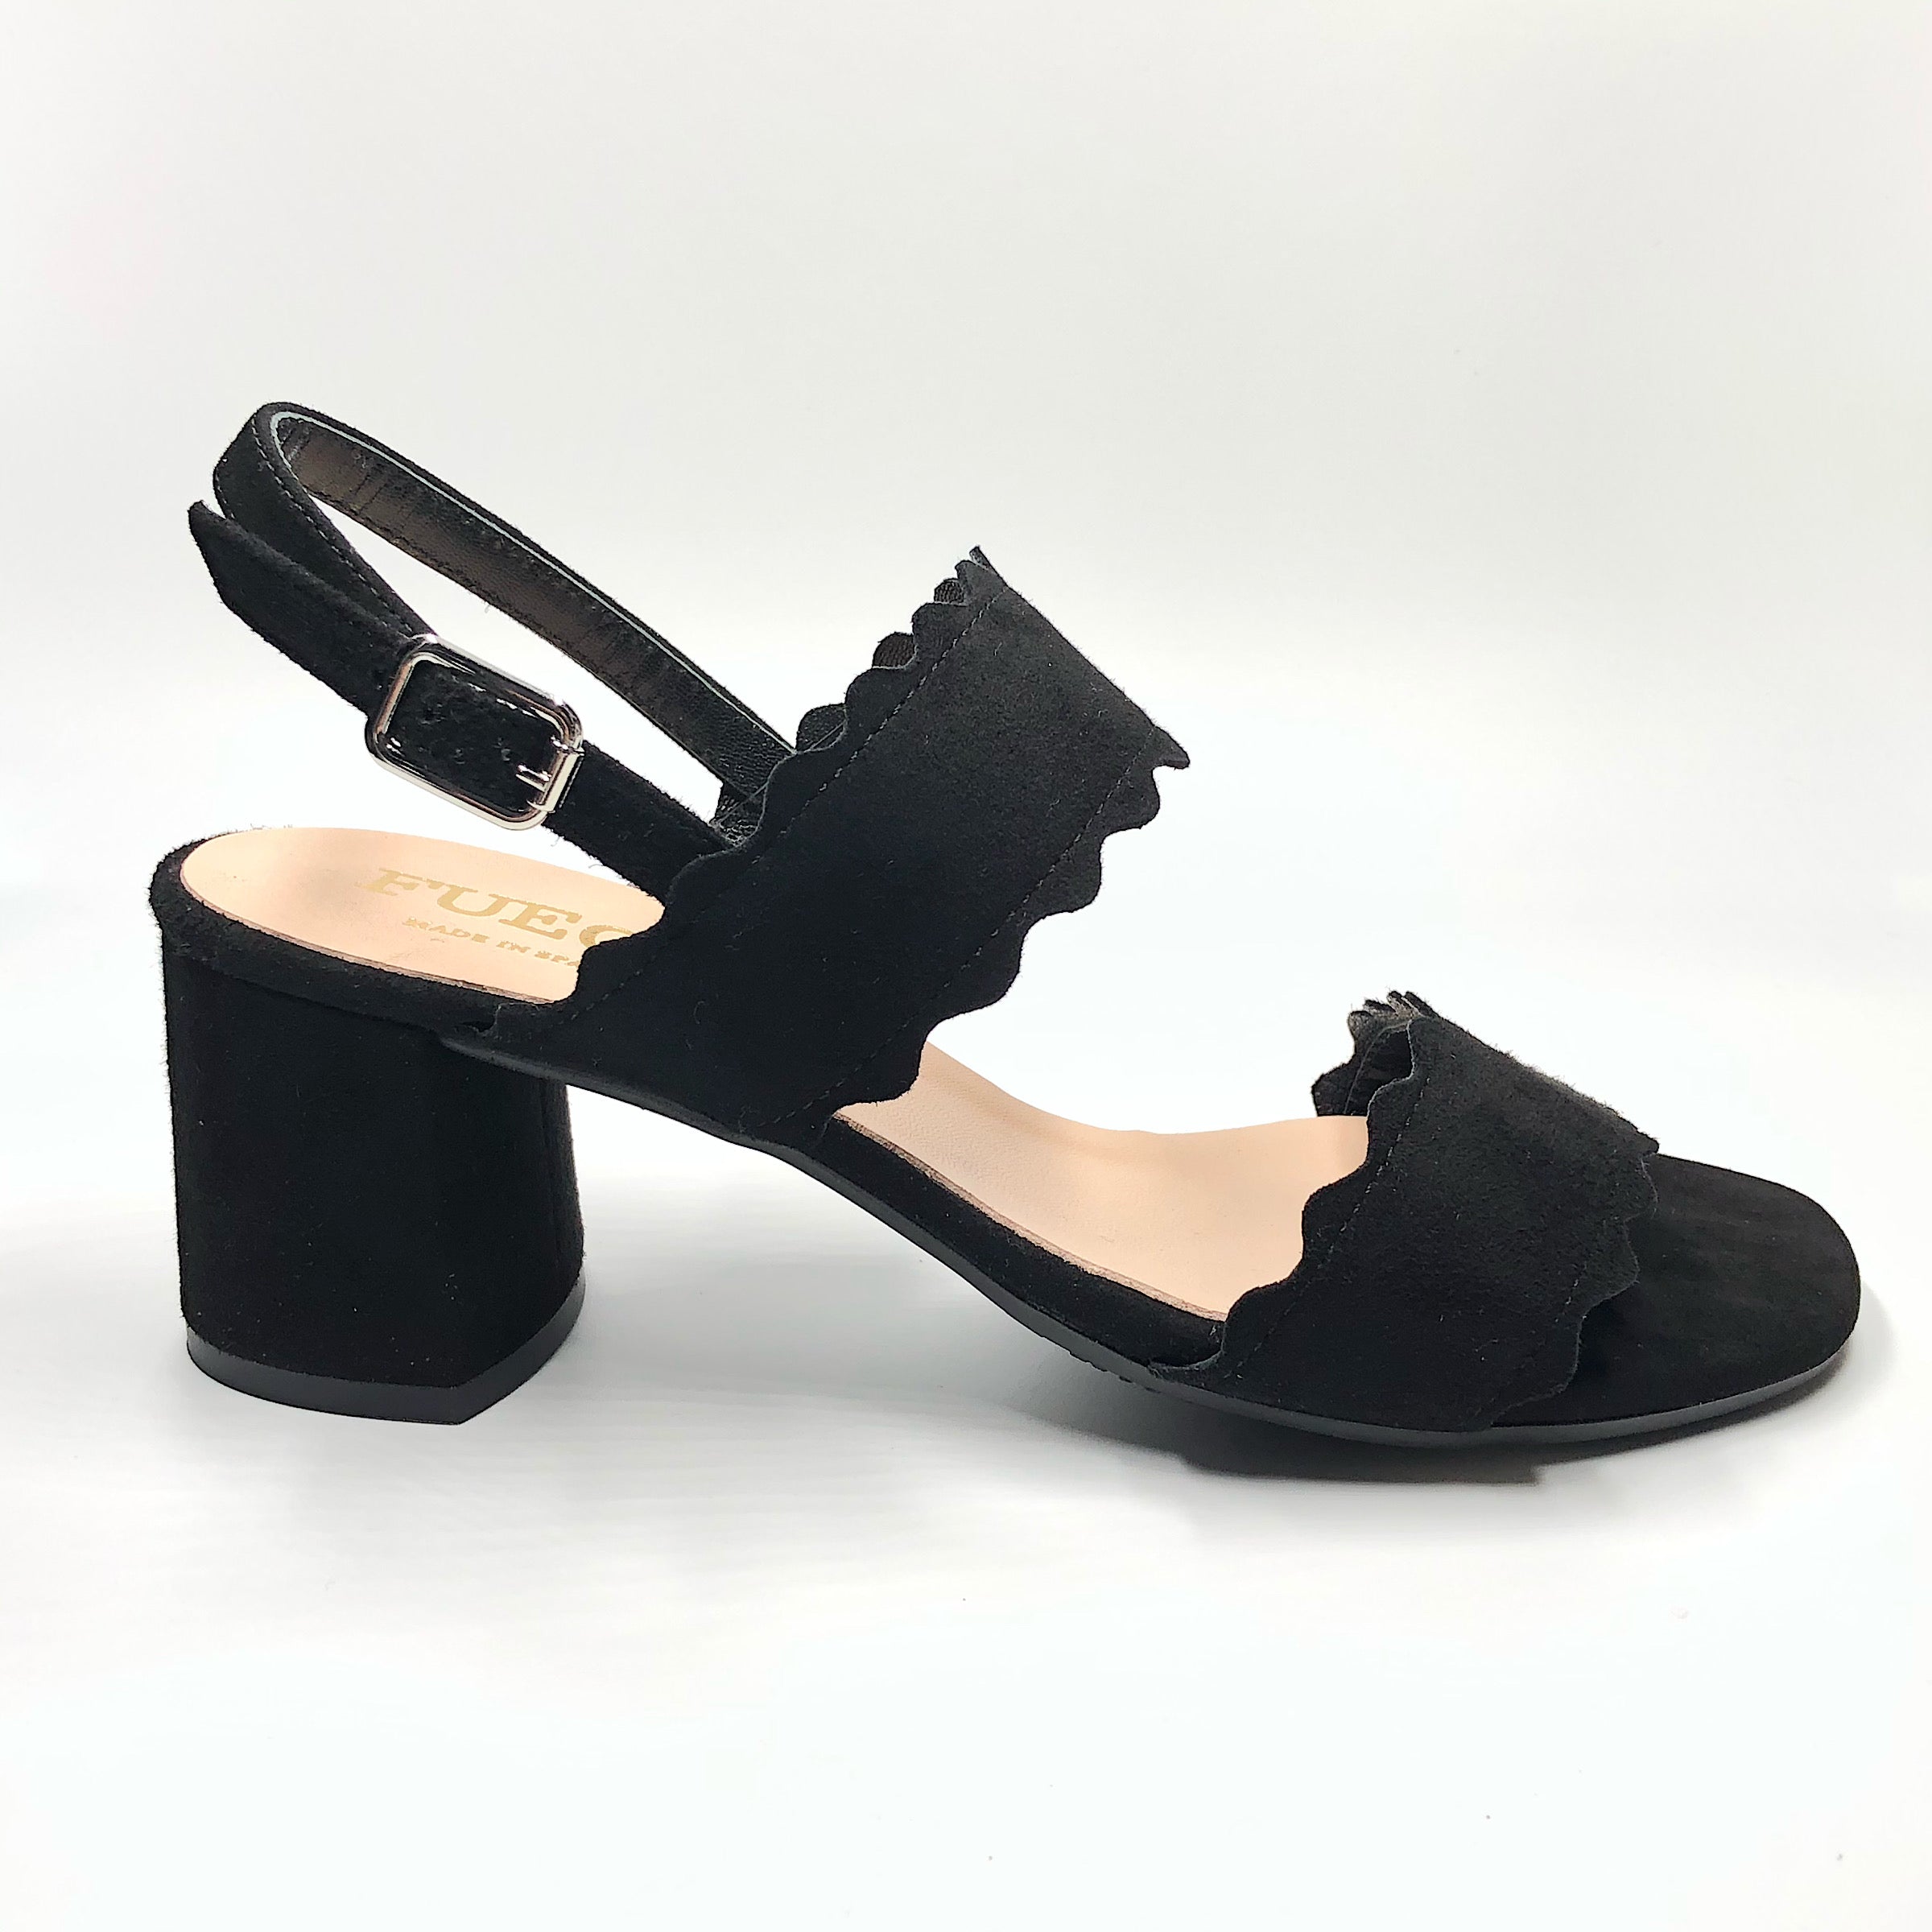 Scallop 2 - The Perfect Sandal in Black